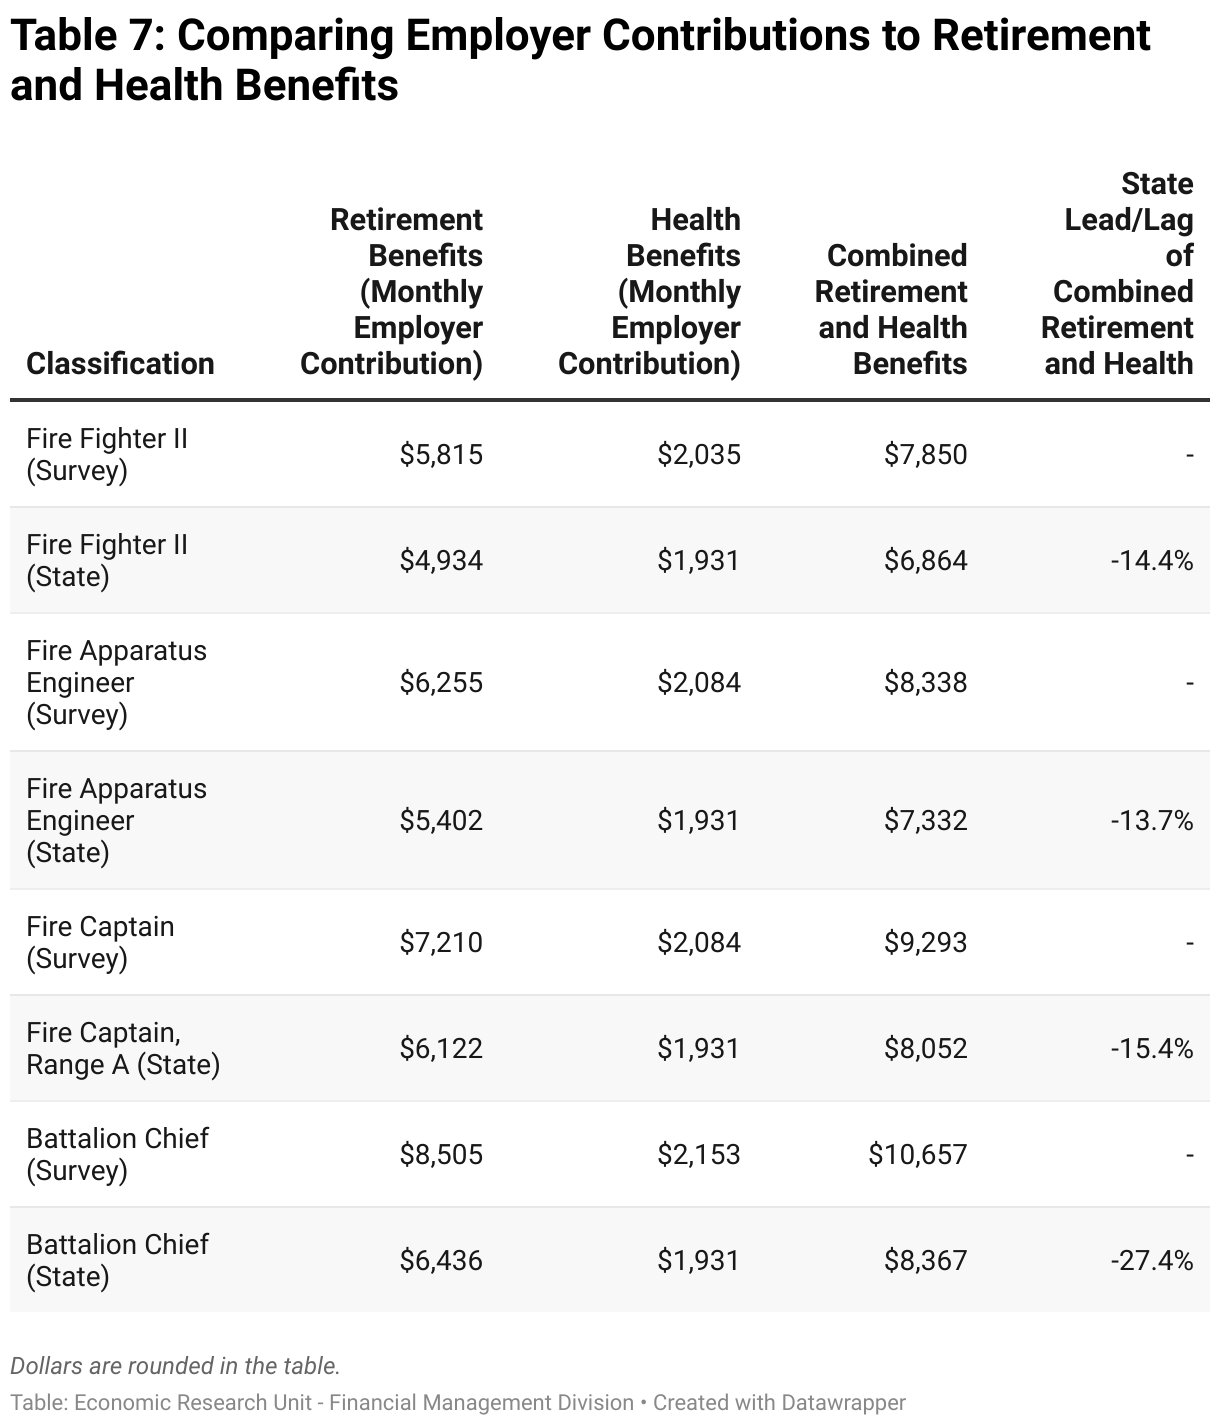 This table compares the monthly employer contributions to retirement and health benefits for all the local jurisdictions in our survey and CAL FIRE across all classifications. The survey average monthly combined retirement and health benefits for each classification are as follows: Firefighter II: $7,850, Fire Apparatus Engineer: $8,338, Fire Captain: $9,293, and Battalion Chief: $10,657. The monthly combined retirement and health benefits for each State classification are as follows: Firefighter II: $6,864, Fire Apparatus Engineer: $7,332, Fire Captain, Range A: $8,052, and Battalion Chief: $8,367. The State lead/lag of combined retirement and health by classification are as follows: Firefighter II: -14.4%, Fire Apparatus Engineer: -13.7%, Fire Captain, Range A: -15.4%, Battalion Chief -27.4%.